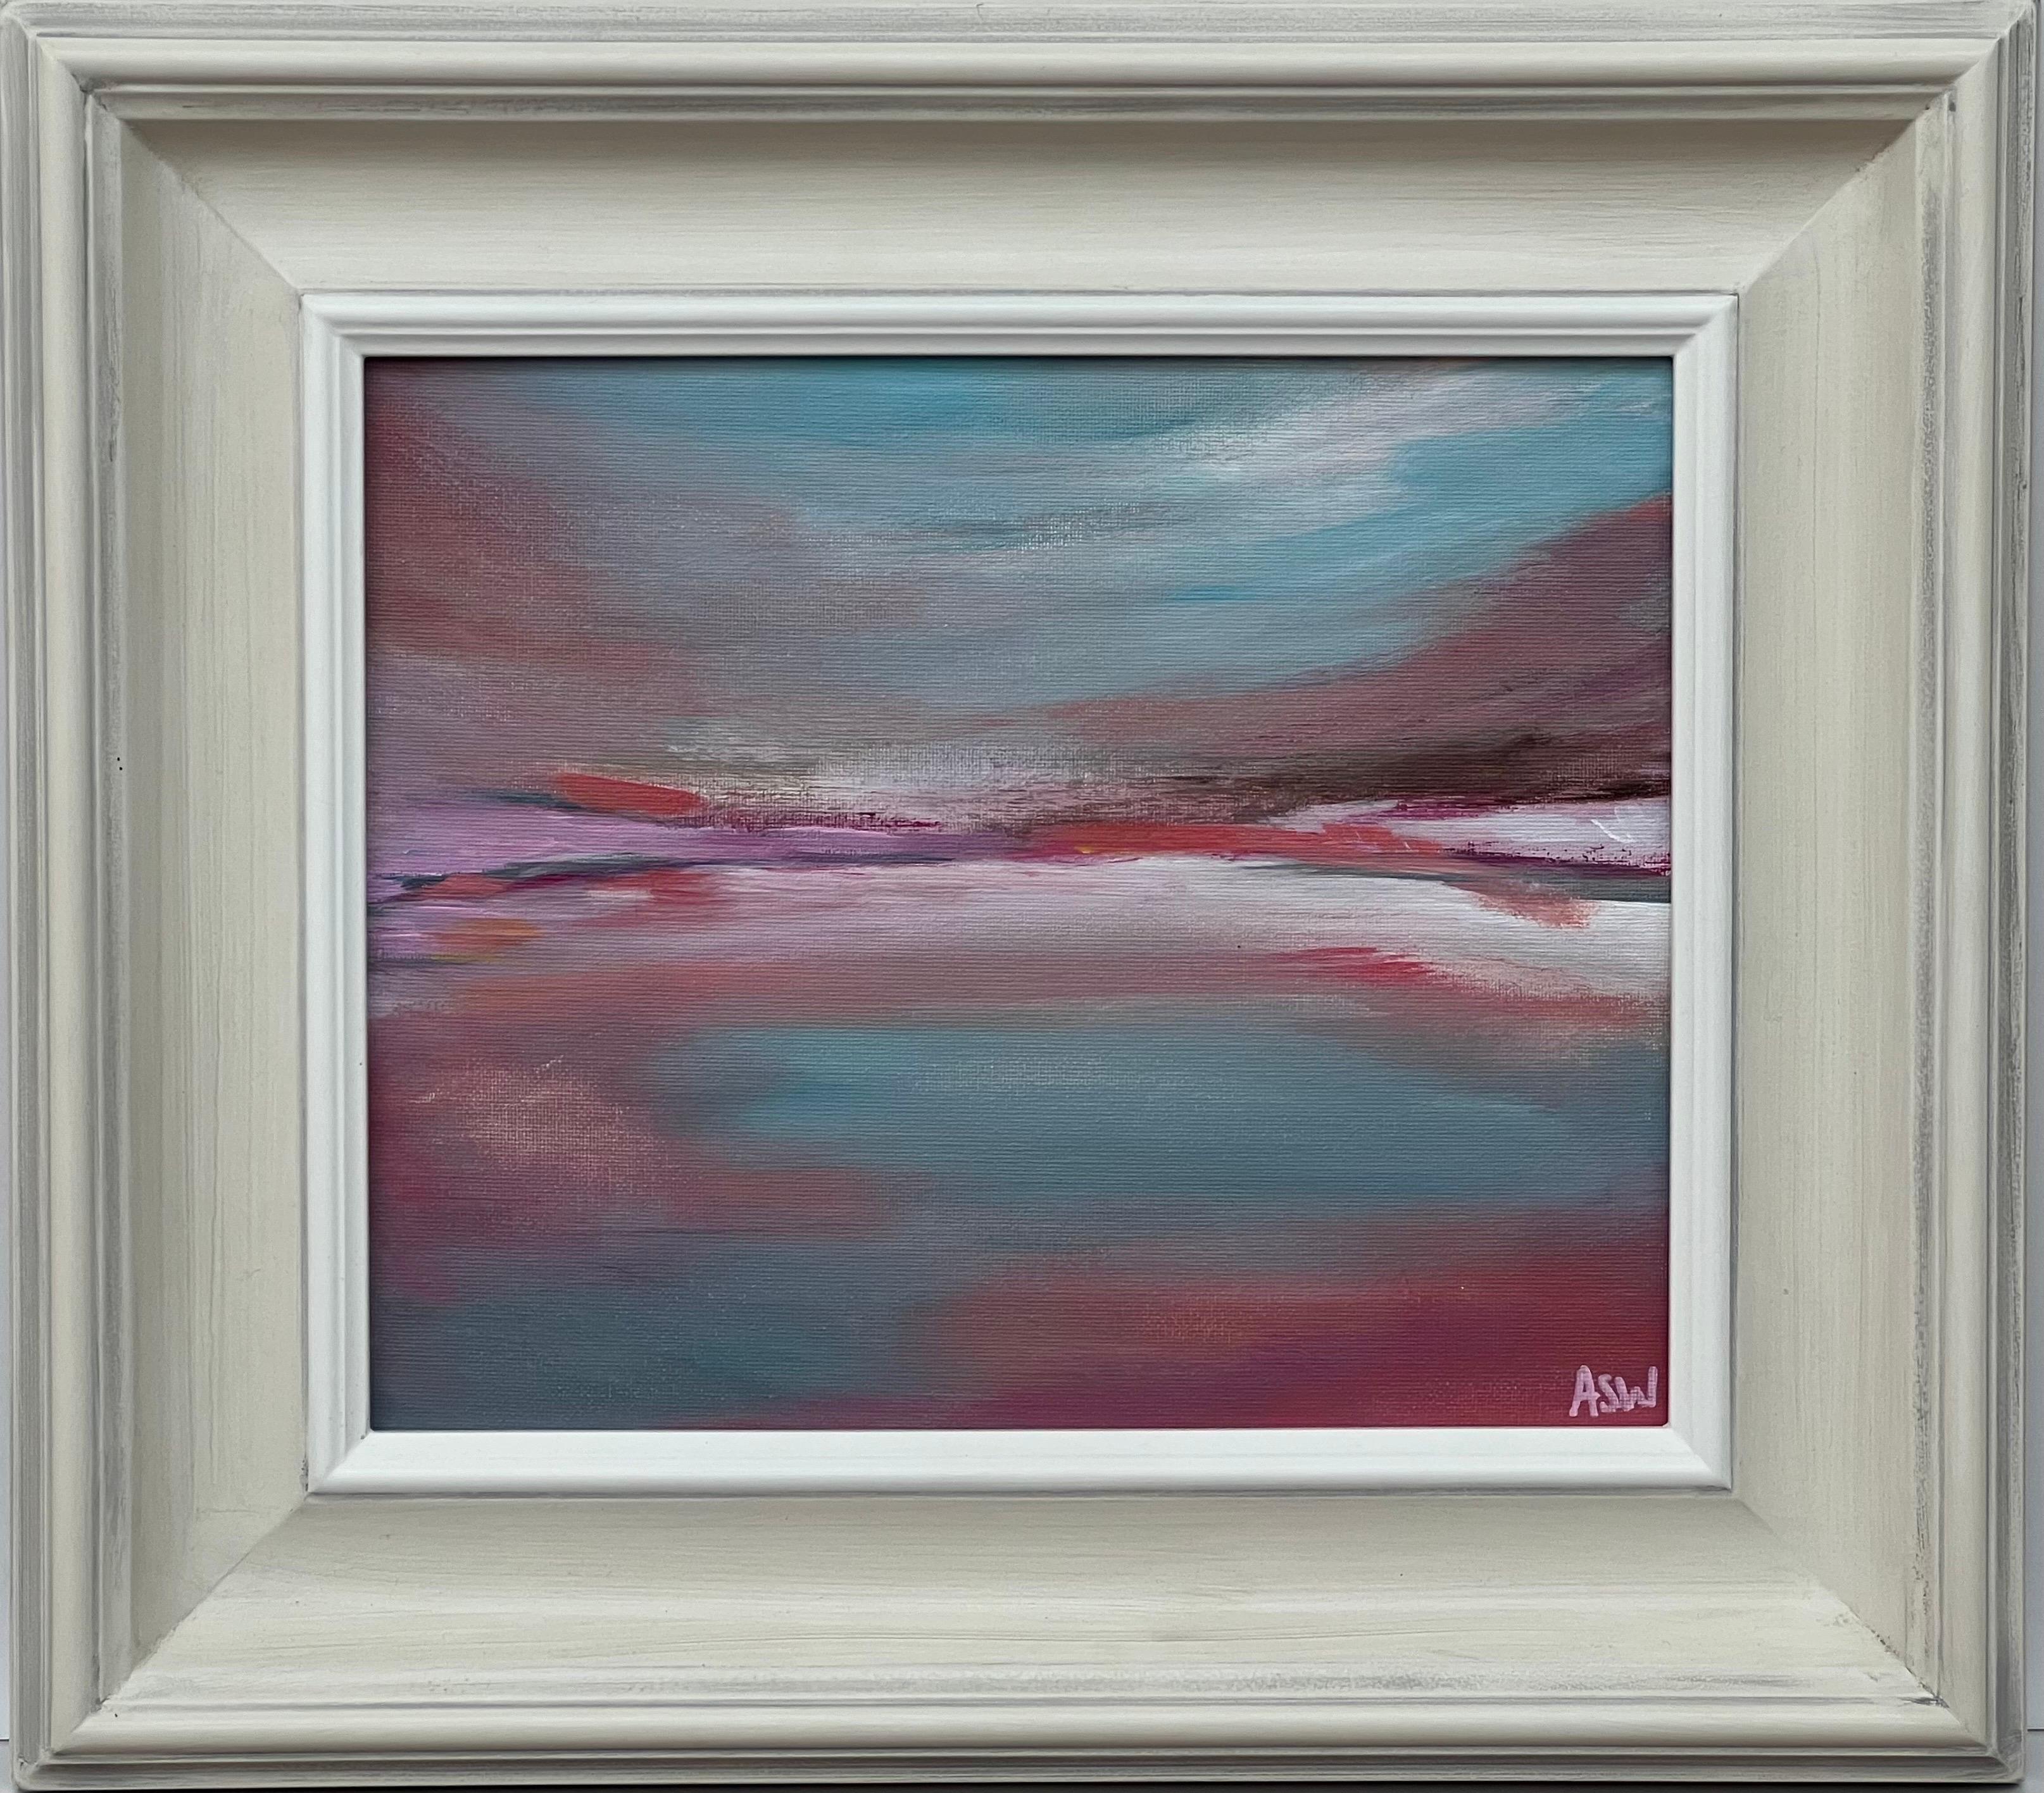 Serene and Dreamy Abstract Landscape using Pink Purple & Blue by British Artist